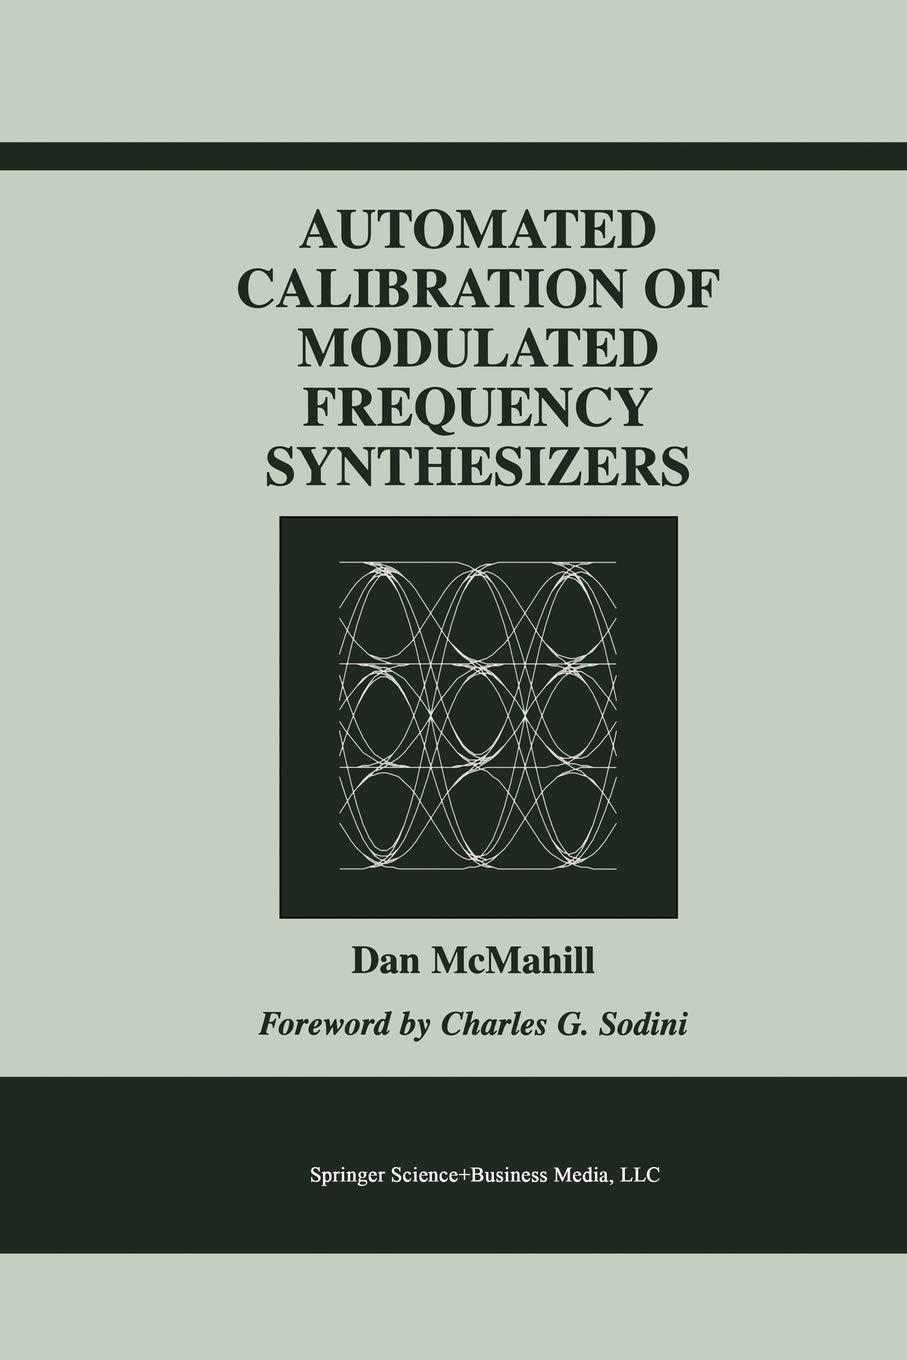 automated calibration of modulated frequency synthesizers 2002 edition dan mcmahill 1475783302, 978-1475783308